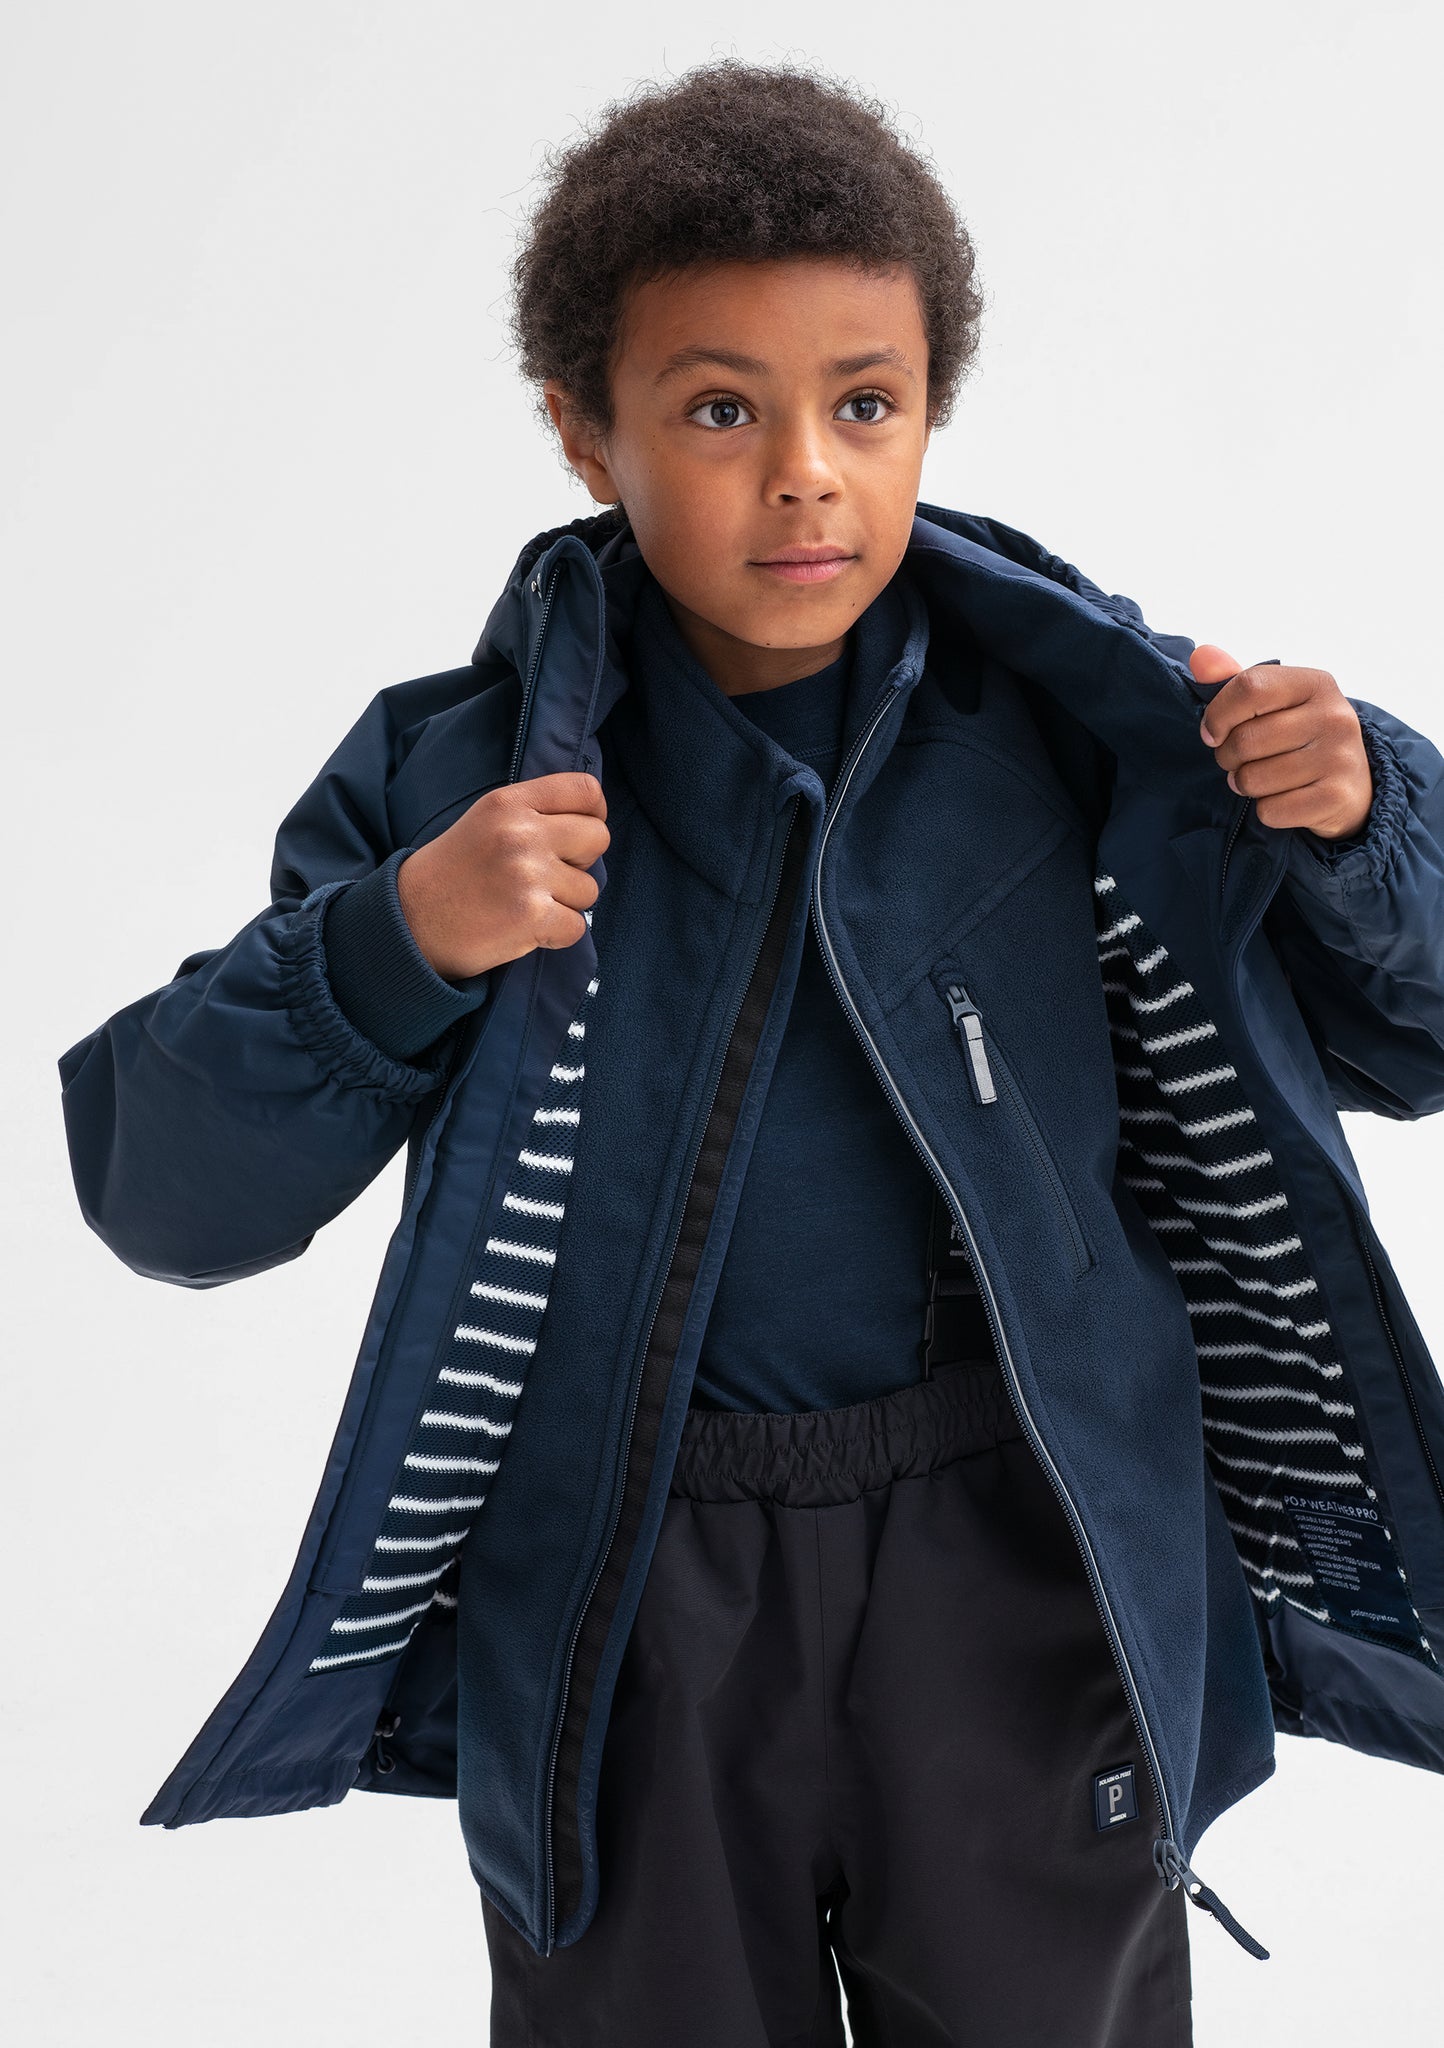 A little boy spotted wearing a navy, kids waterproof jacket, layered with navy, kids fleece jacket, made of soft fabric.